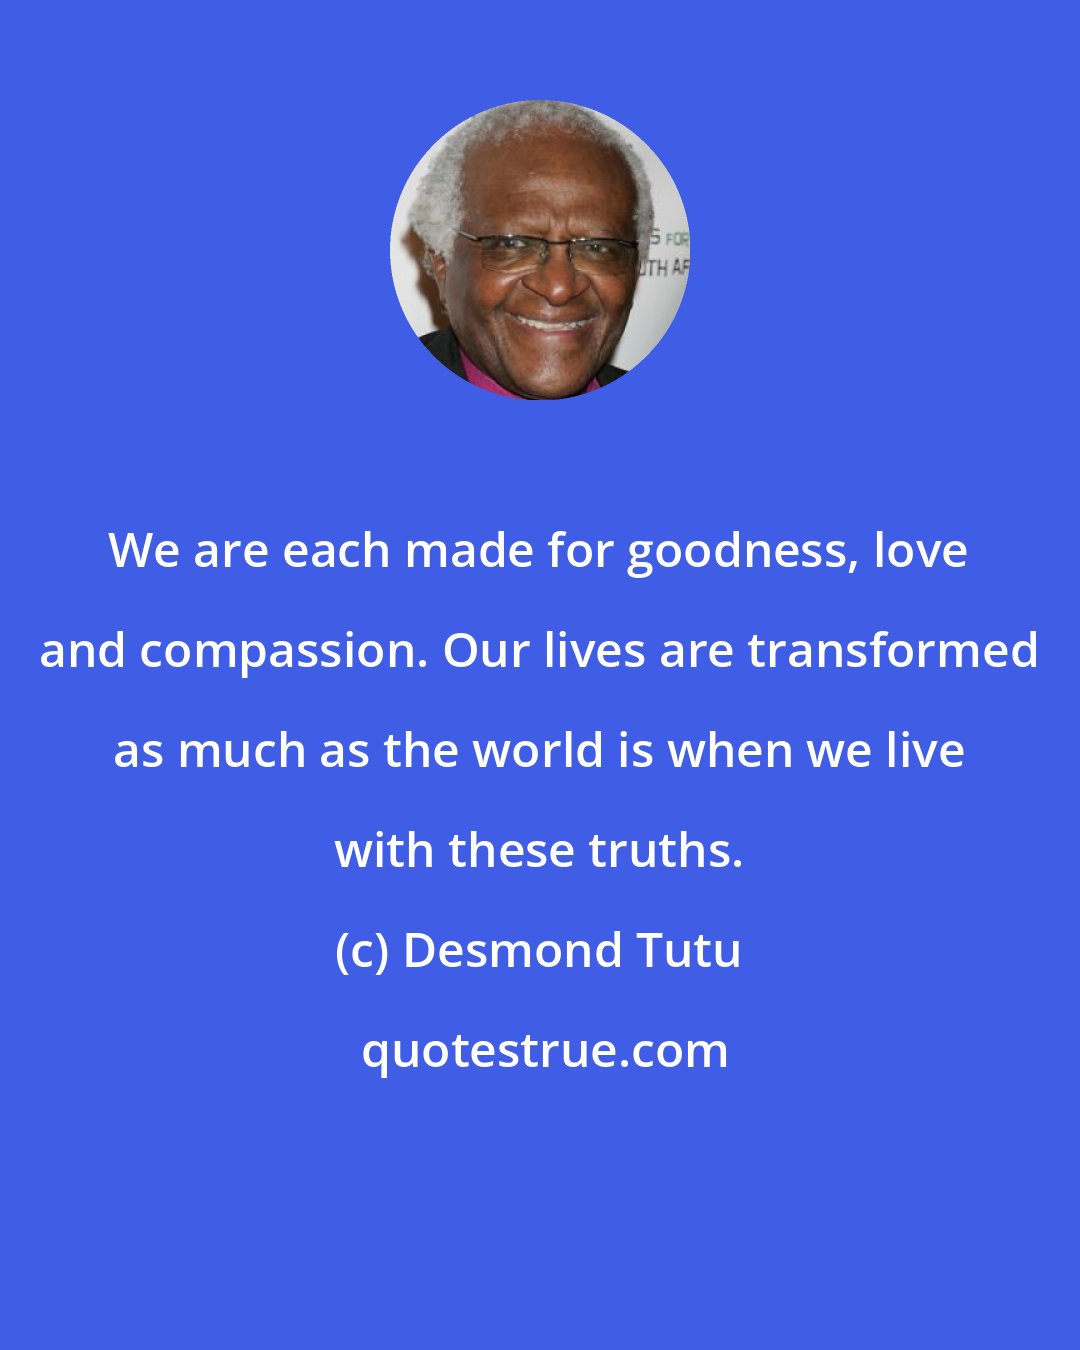 Desmond Tutu: We are each made for goodness, love and compassion. Our lives are transformed as much as the world is when we live with these truths.